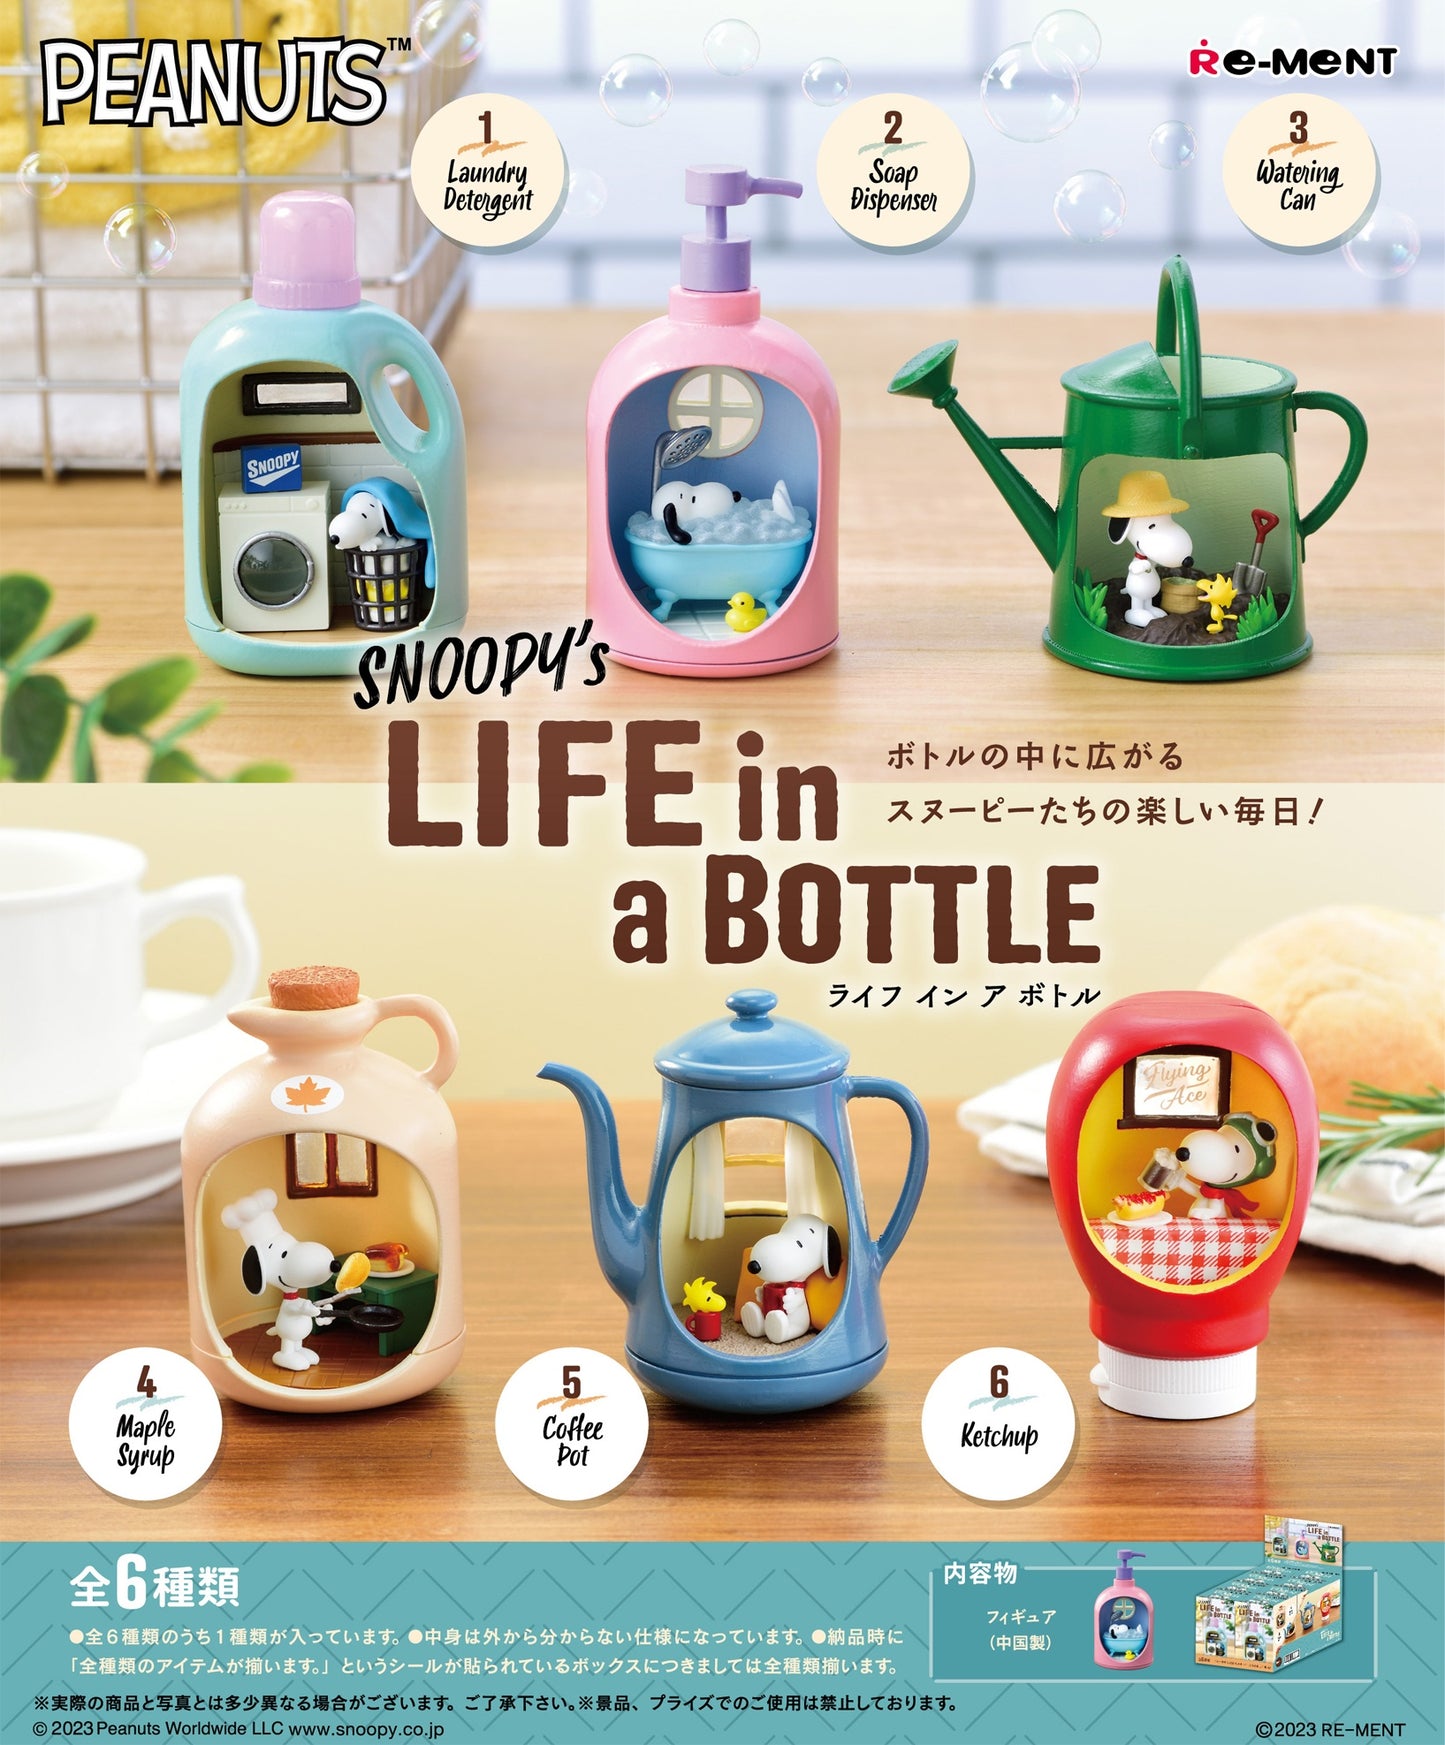 Peanuts: SNOOPY's LIFE in a BOTTLE: 1 Random Pull